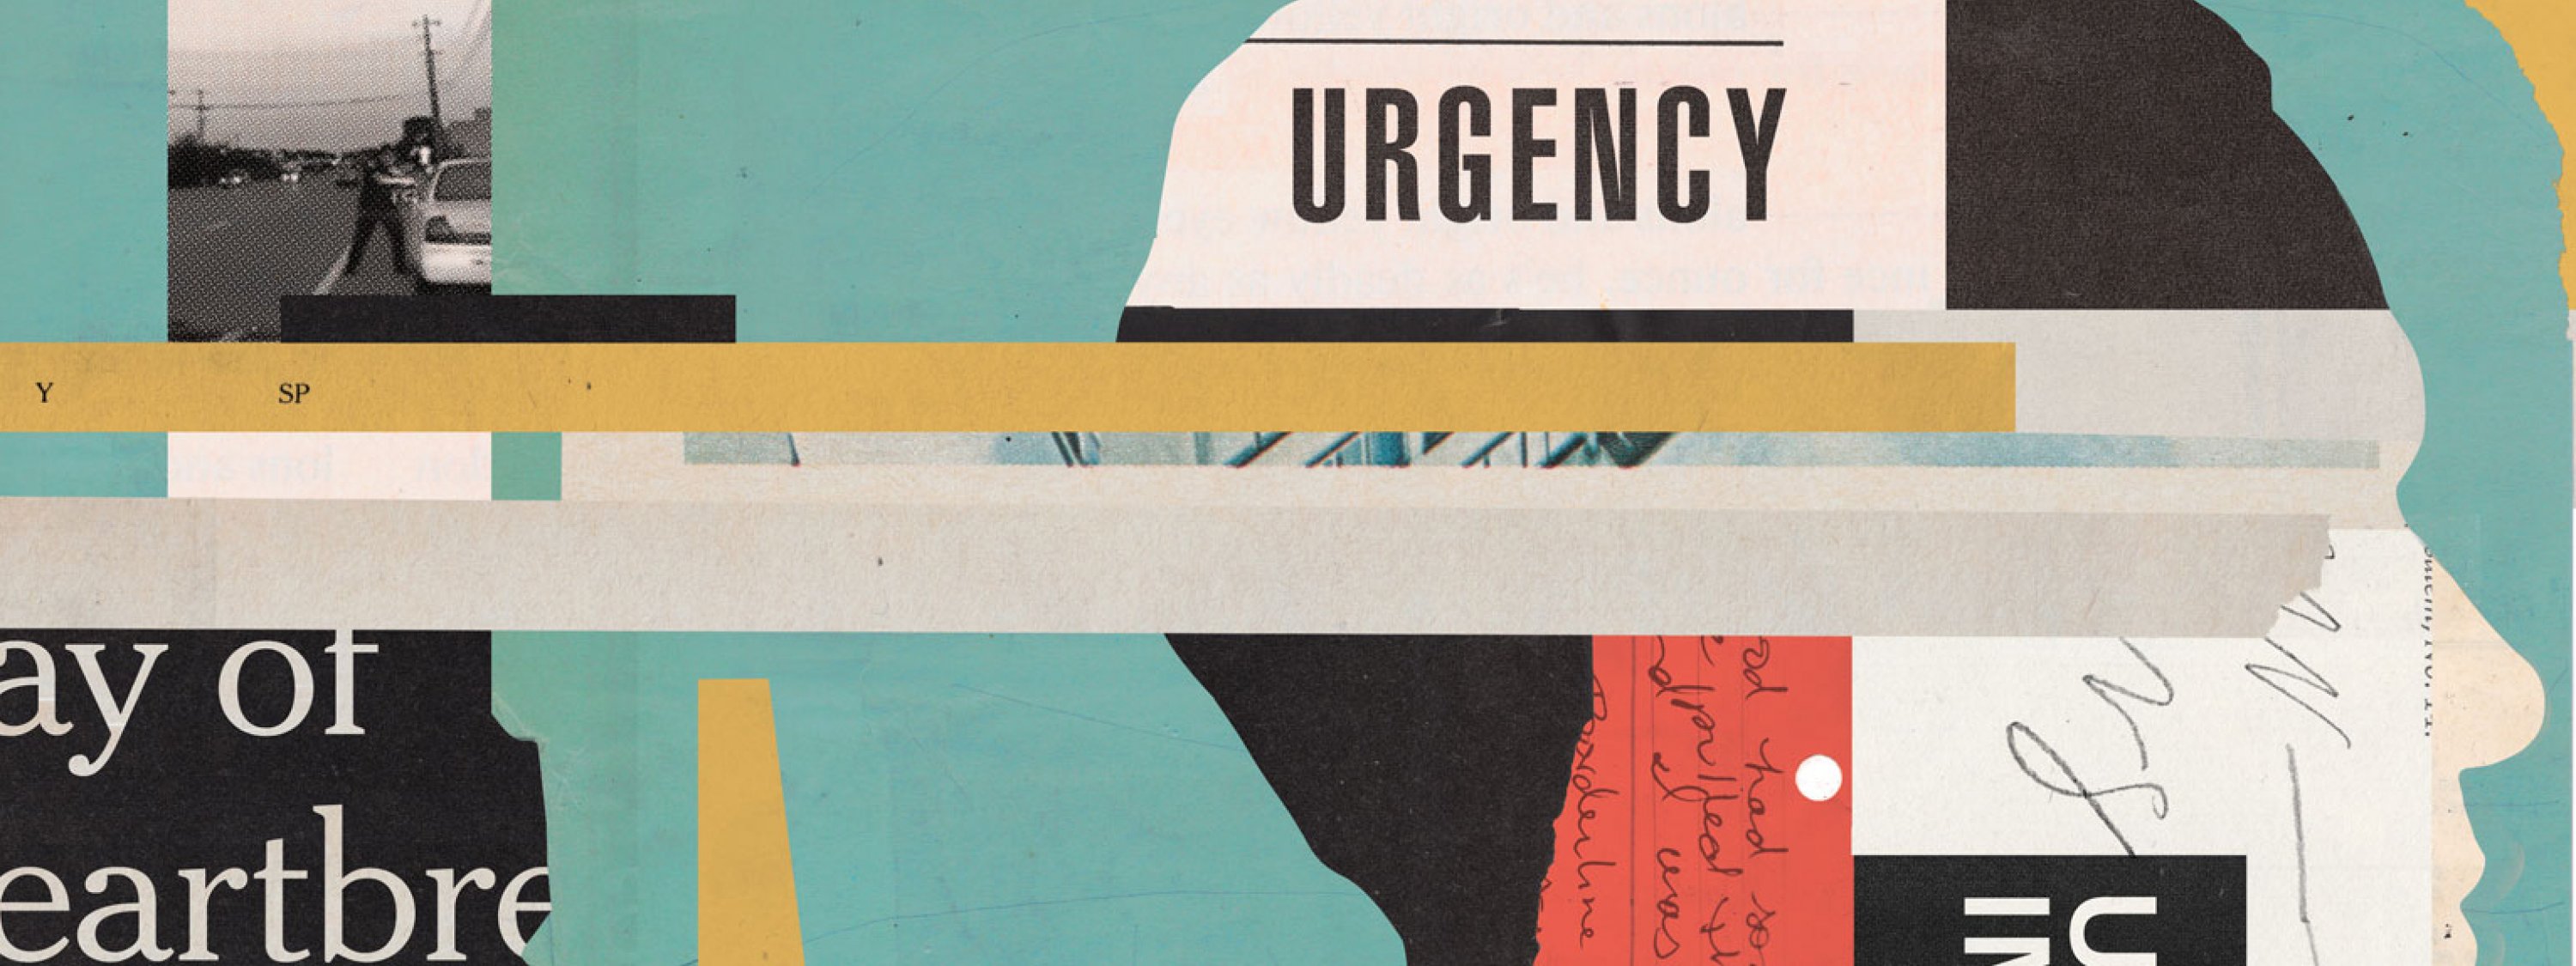 Illustration of a head silhouette with the word "urgency" on it and newspaper clippings